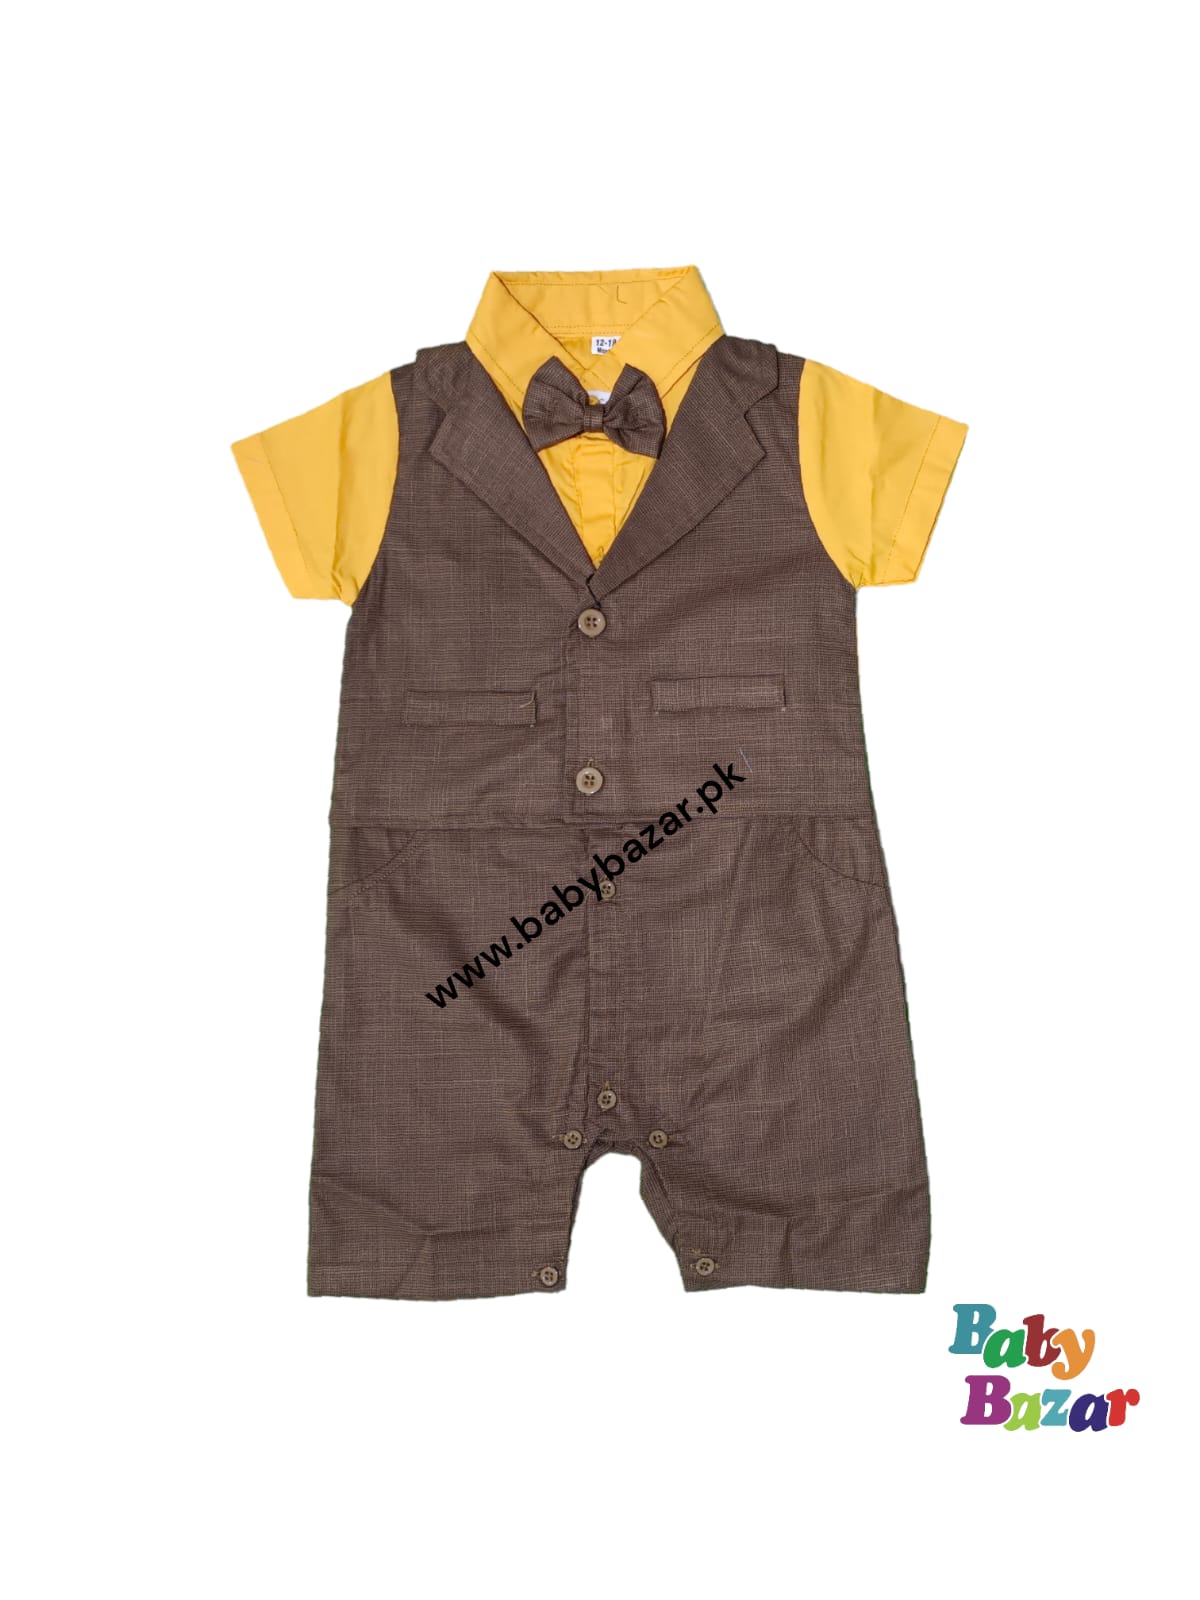 Summer Stylish Romper with Bow Tie for Kids -